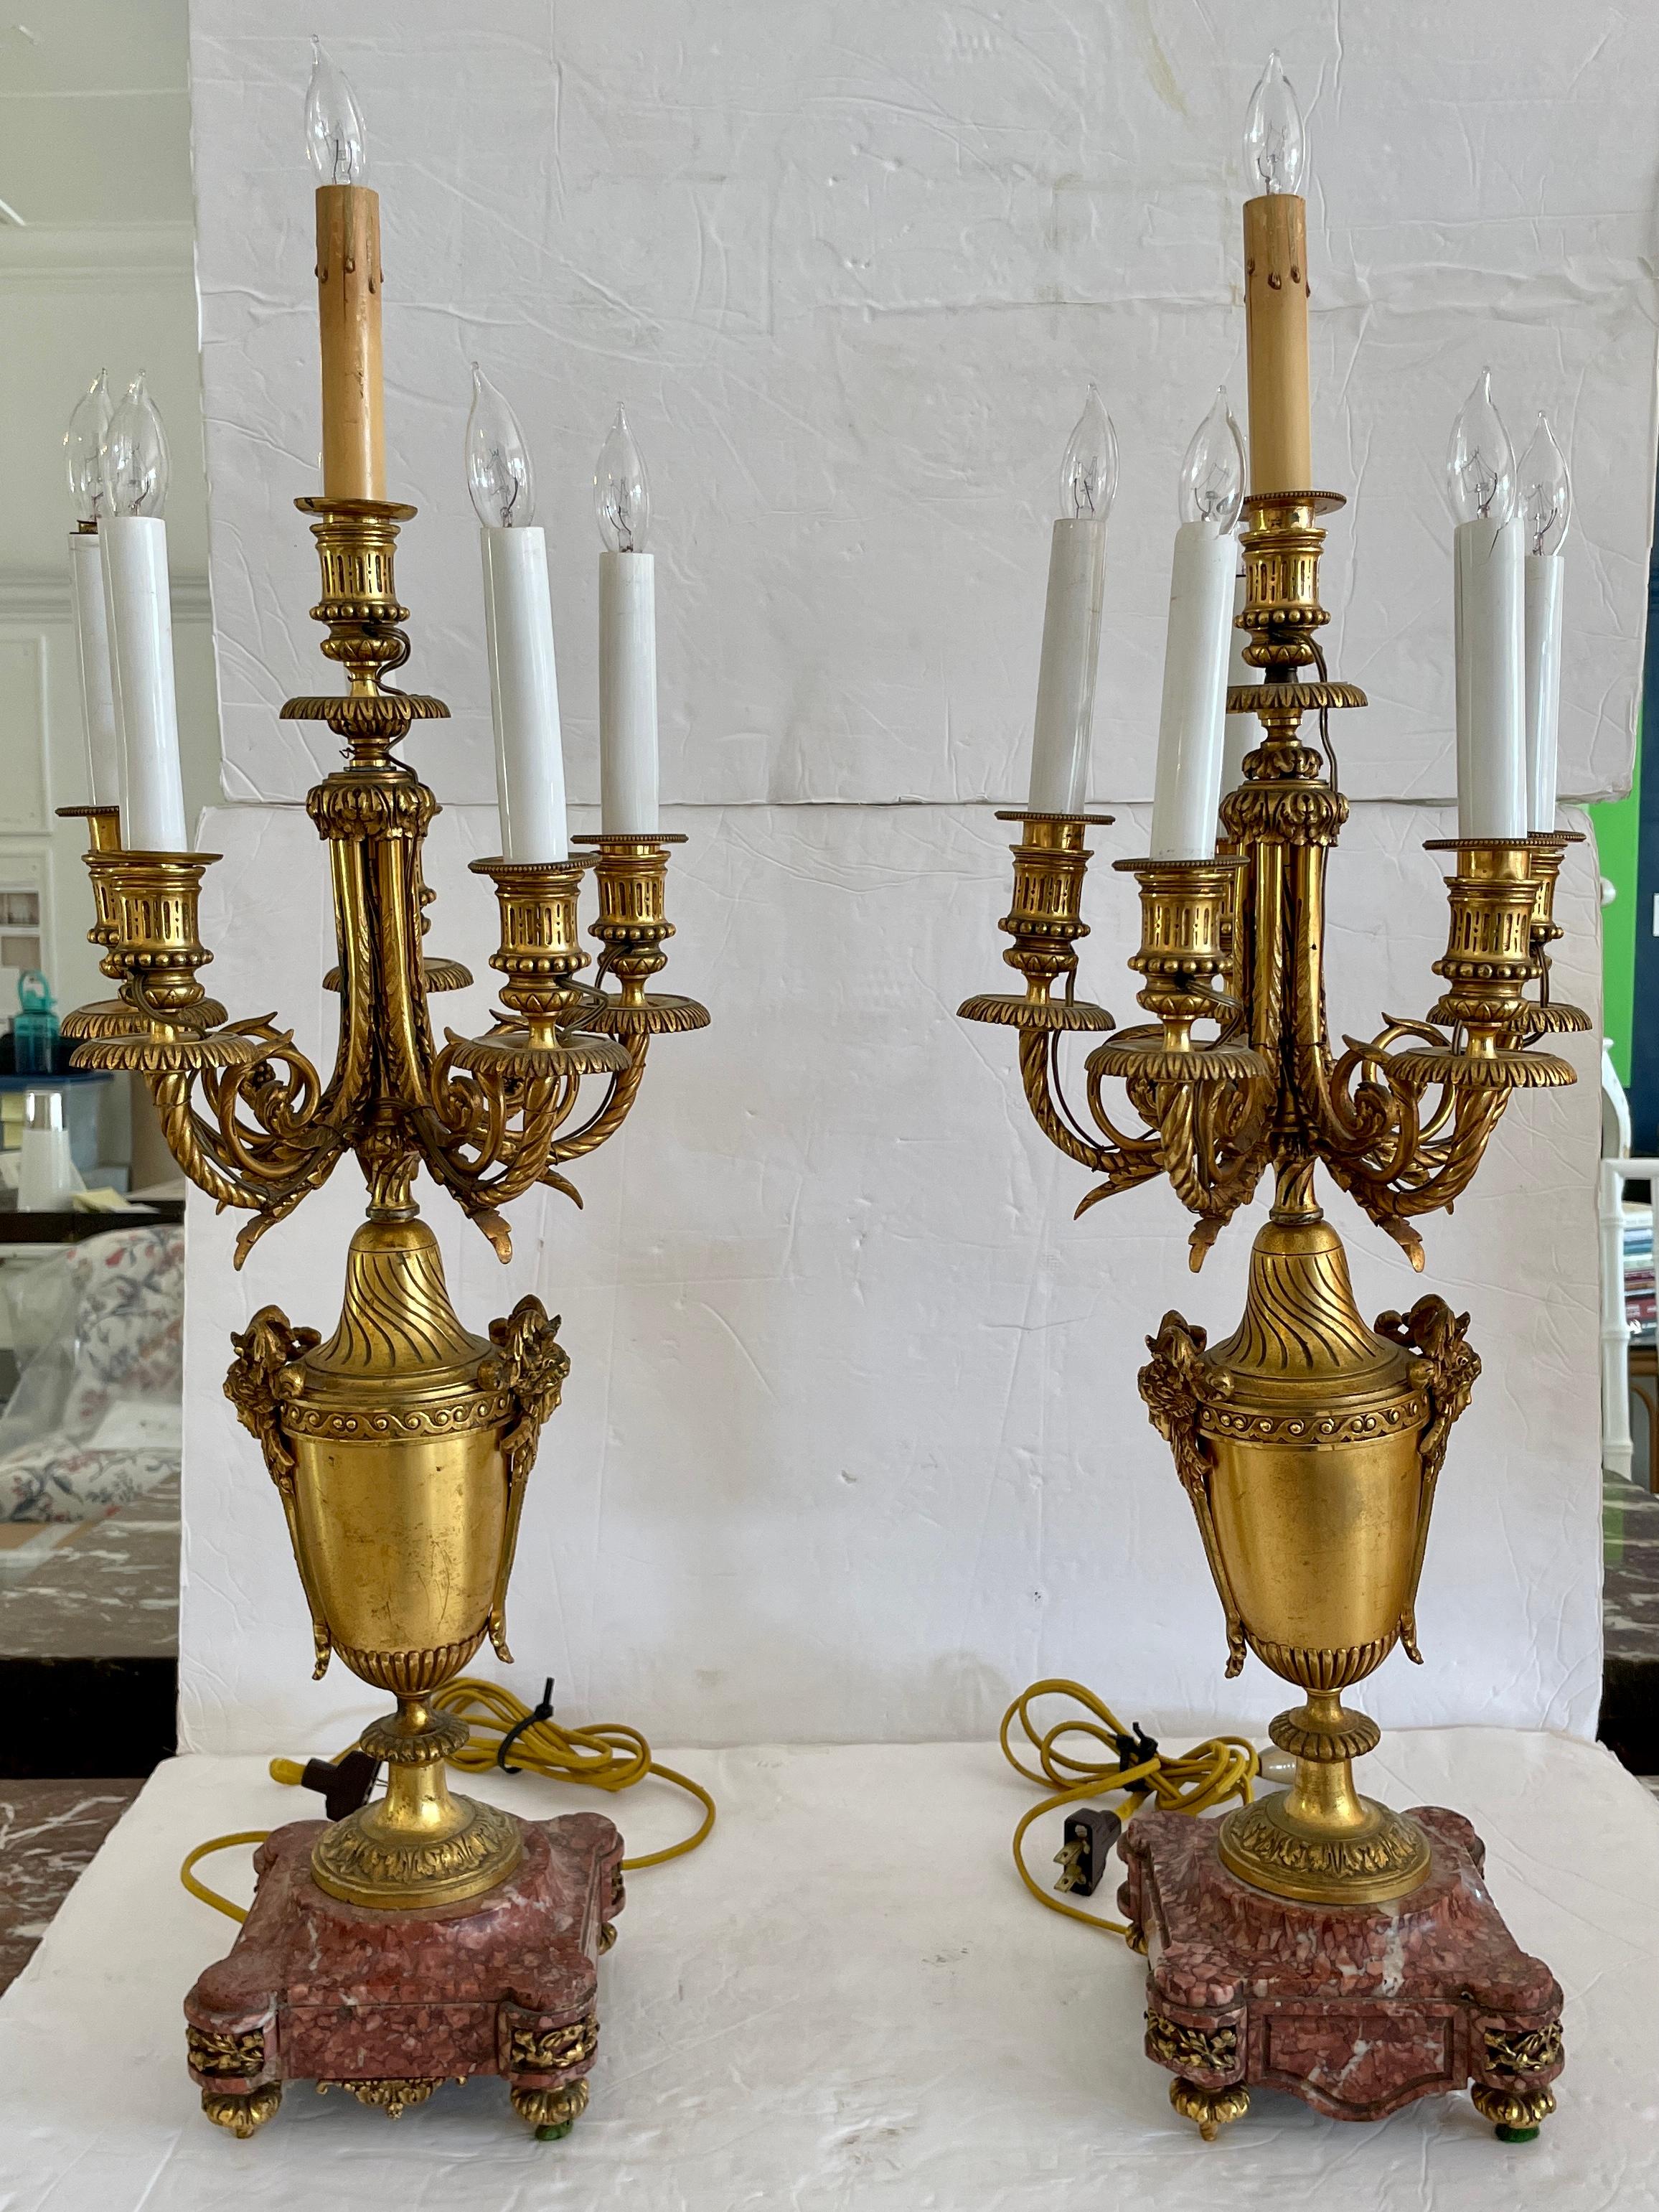 Beautiful pair of French bronze and marble base urns candelabra table lamps with original finish. Very elegant shape and size. Add some French style to your home.